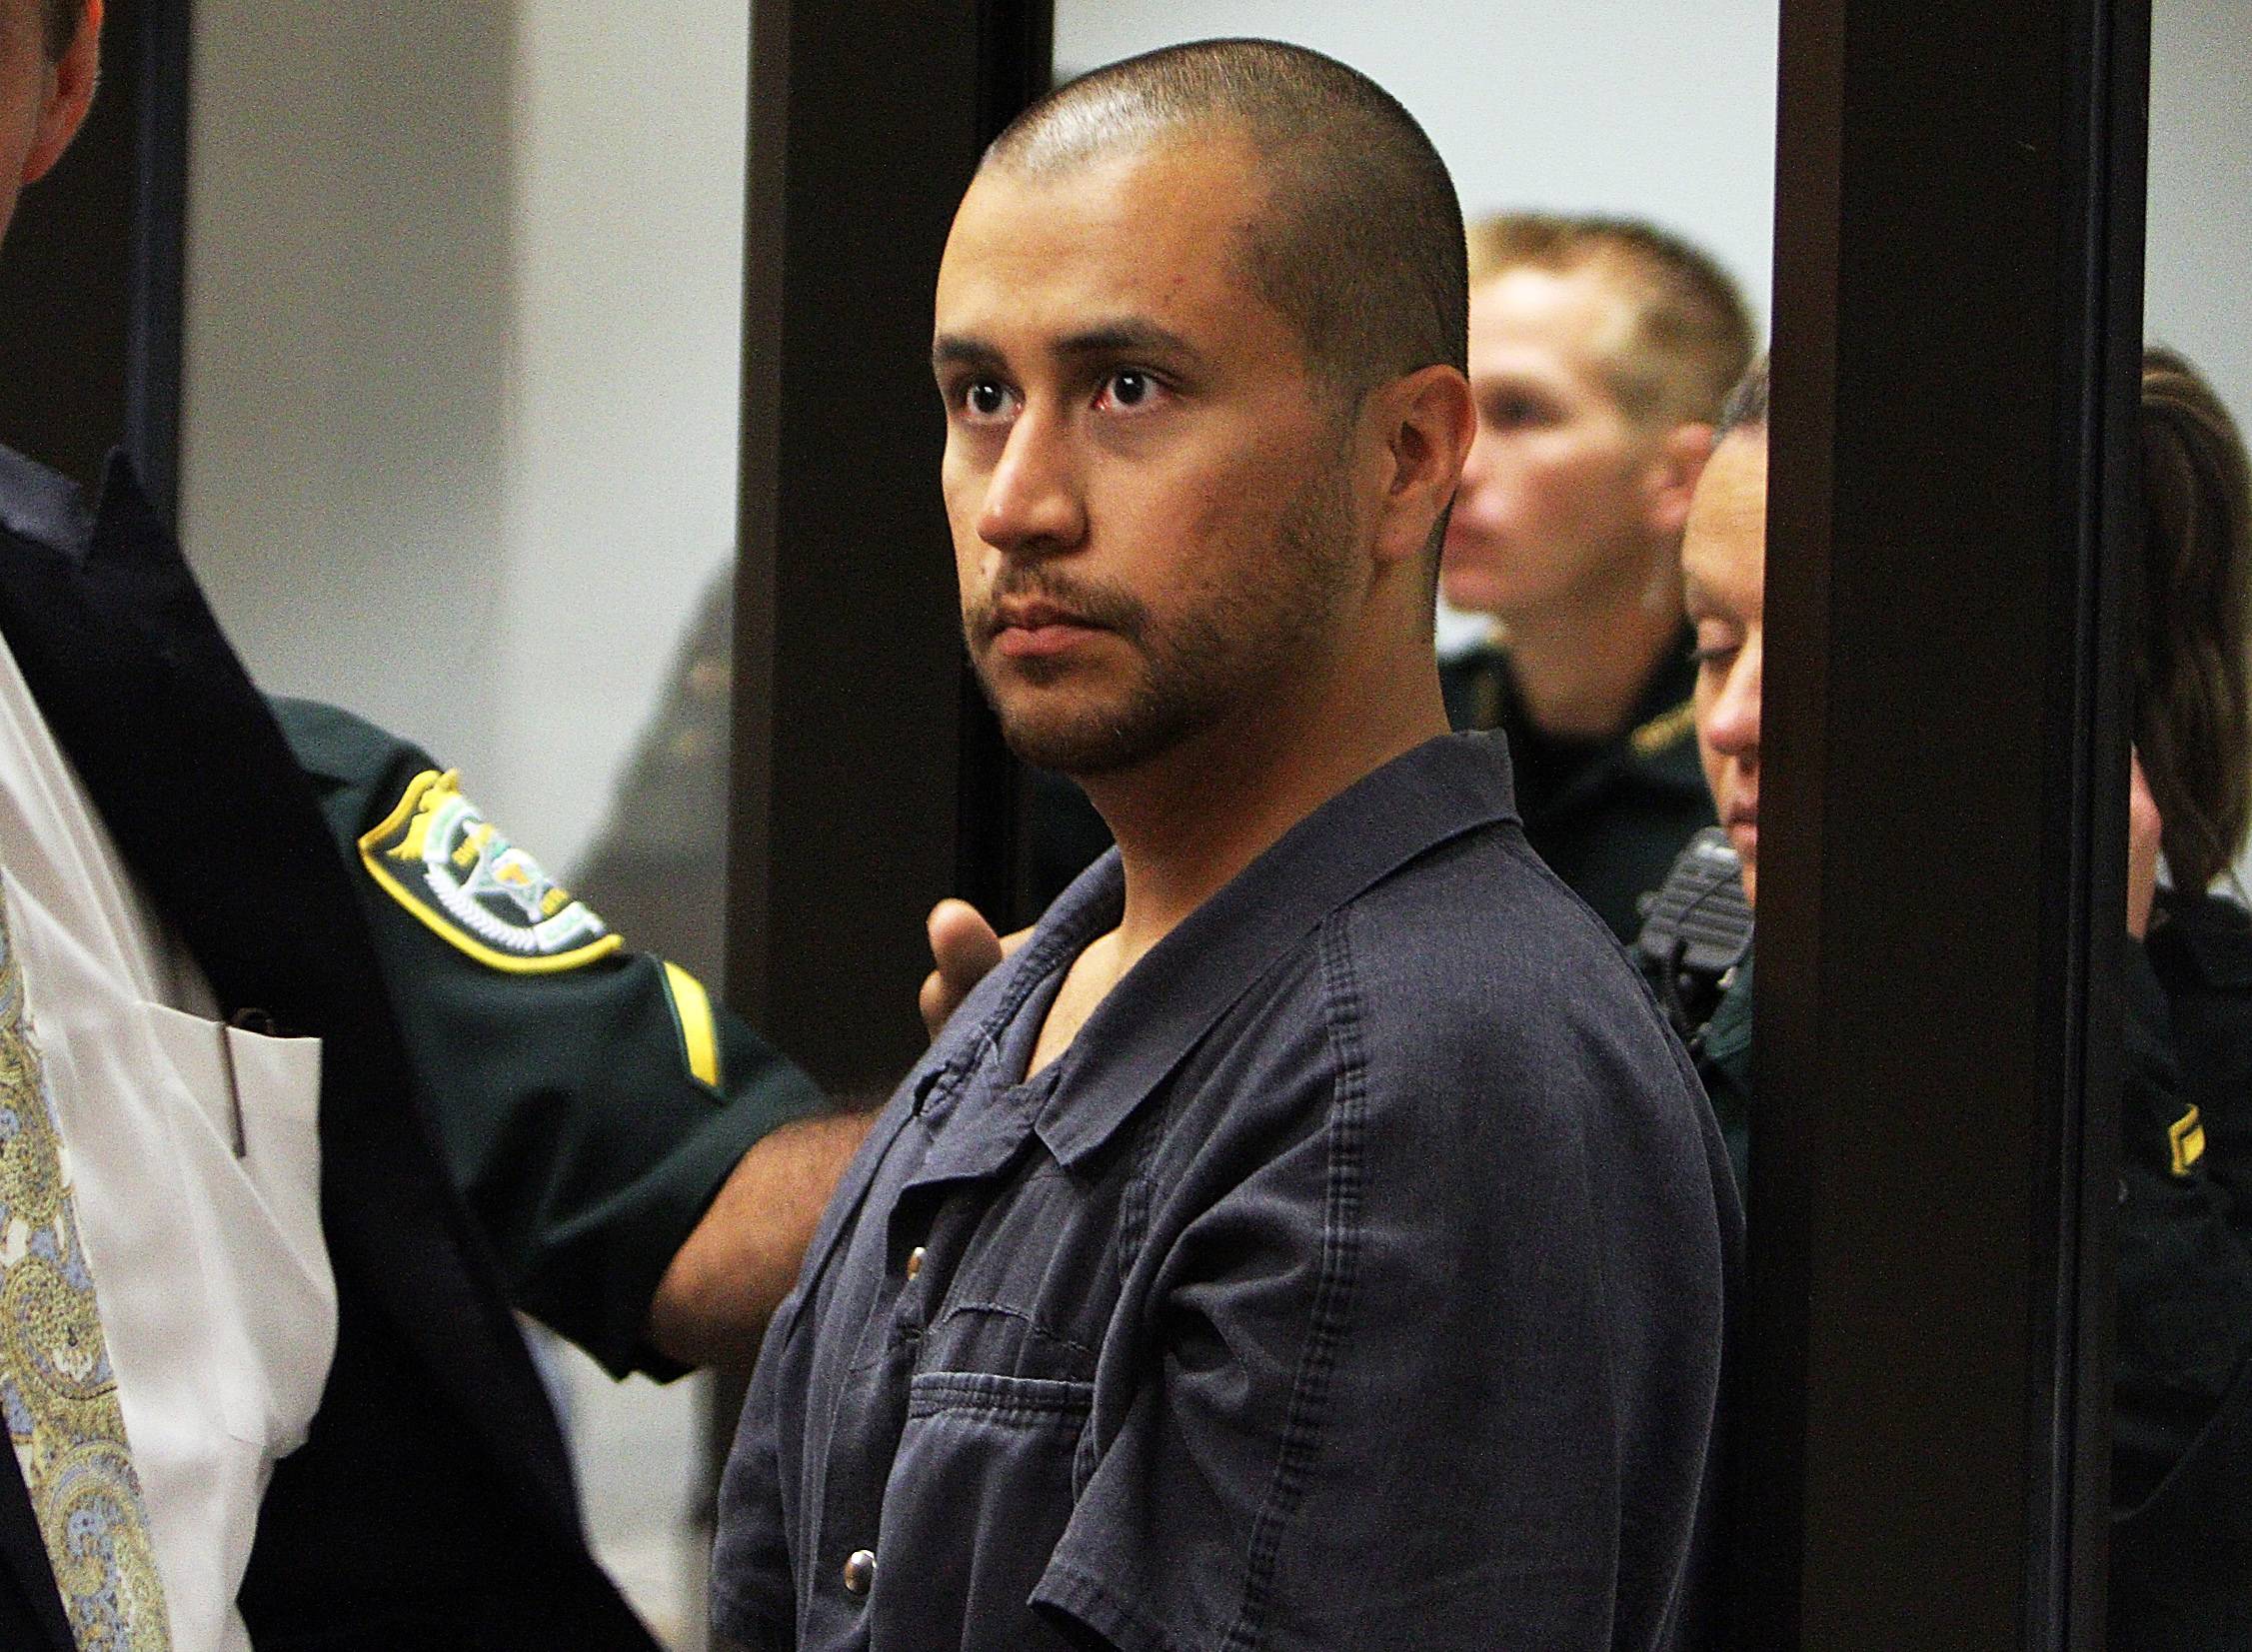 George Zimmerman - George Zimmerman, 28, said he shot Trayvon in self-defense on Feb. 26. Zimmerman told police Trayvon looked like “he was up to no good” while walking home in the gated community. Forty-five days after the shooting, Zimmerman was charged with second-degree murder.(Photo: Gary Green/The Orlando Sentinel-Pool/Getty Images)